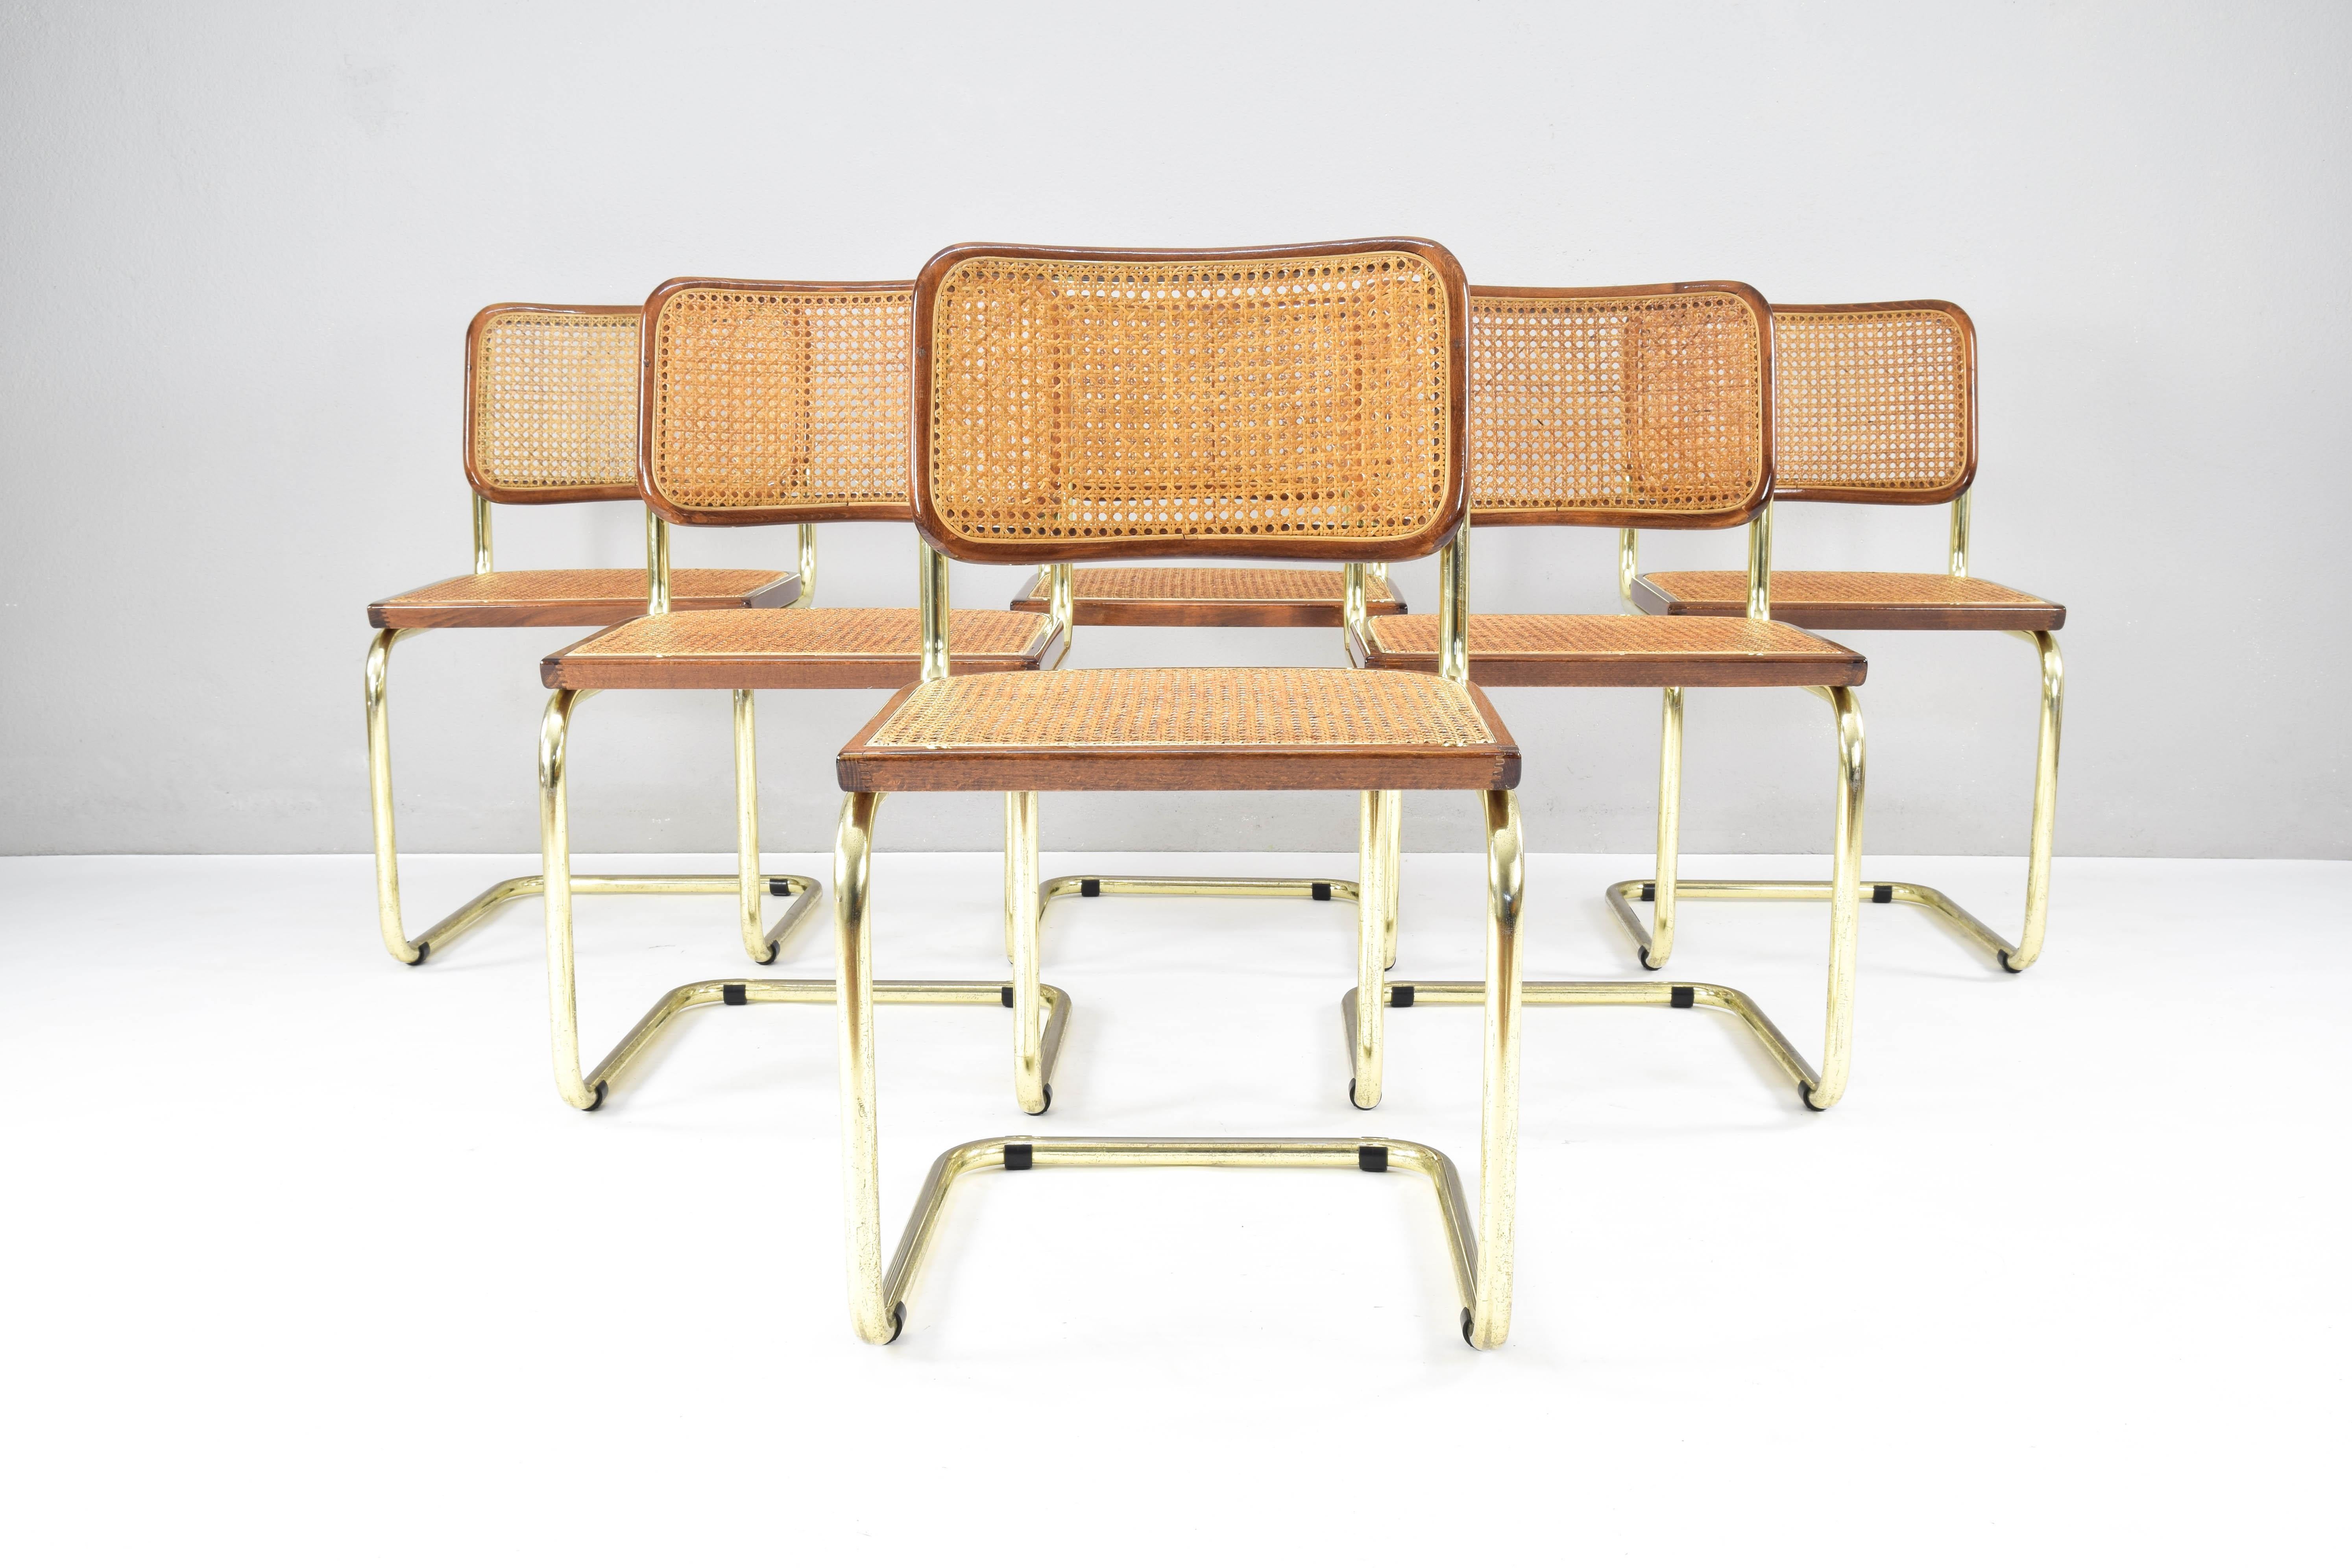 Set of six Cesca chairs model B32, Italy from the 70s. Tubular structure in brass steel. Beech wood frames and natural Viennese grating.
All the seat grilles have been put in new. Brass has wear areas as shown in the images.

Measures:
Height 83